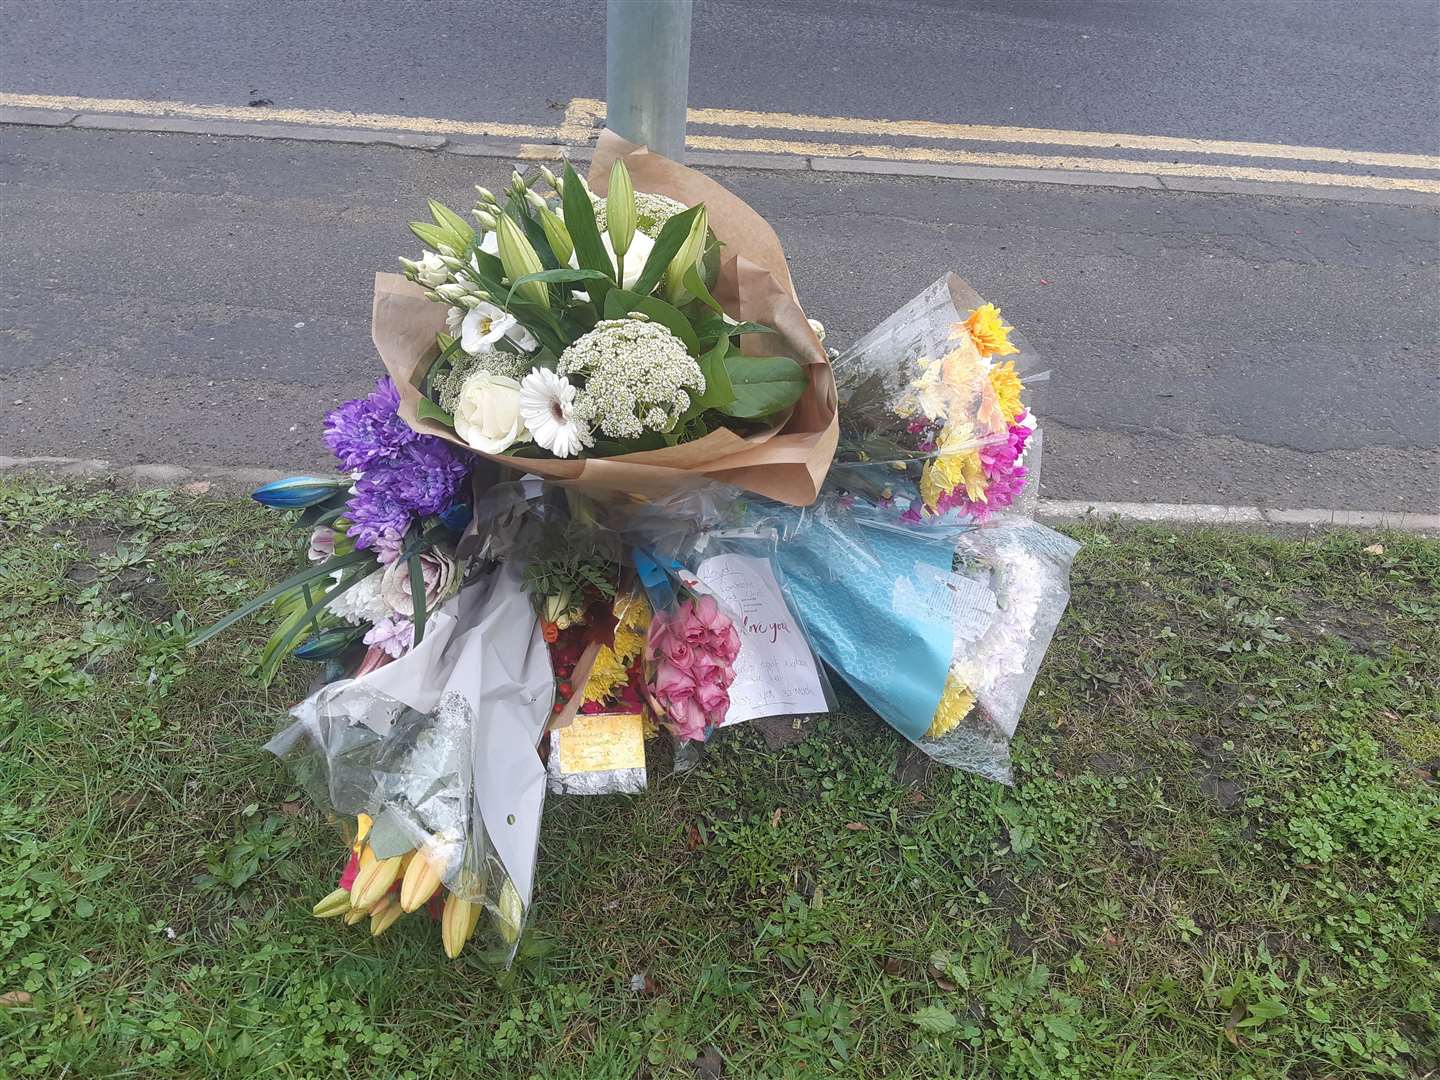 Floral tributes were arranged near the spot of the fatal collision on Medway City Estate